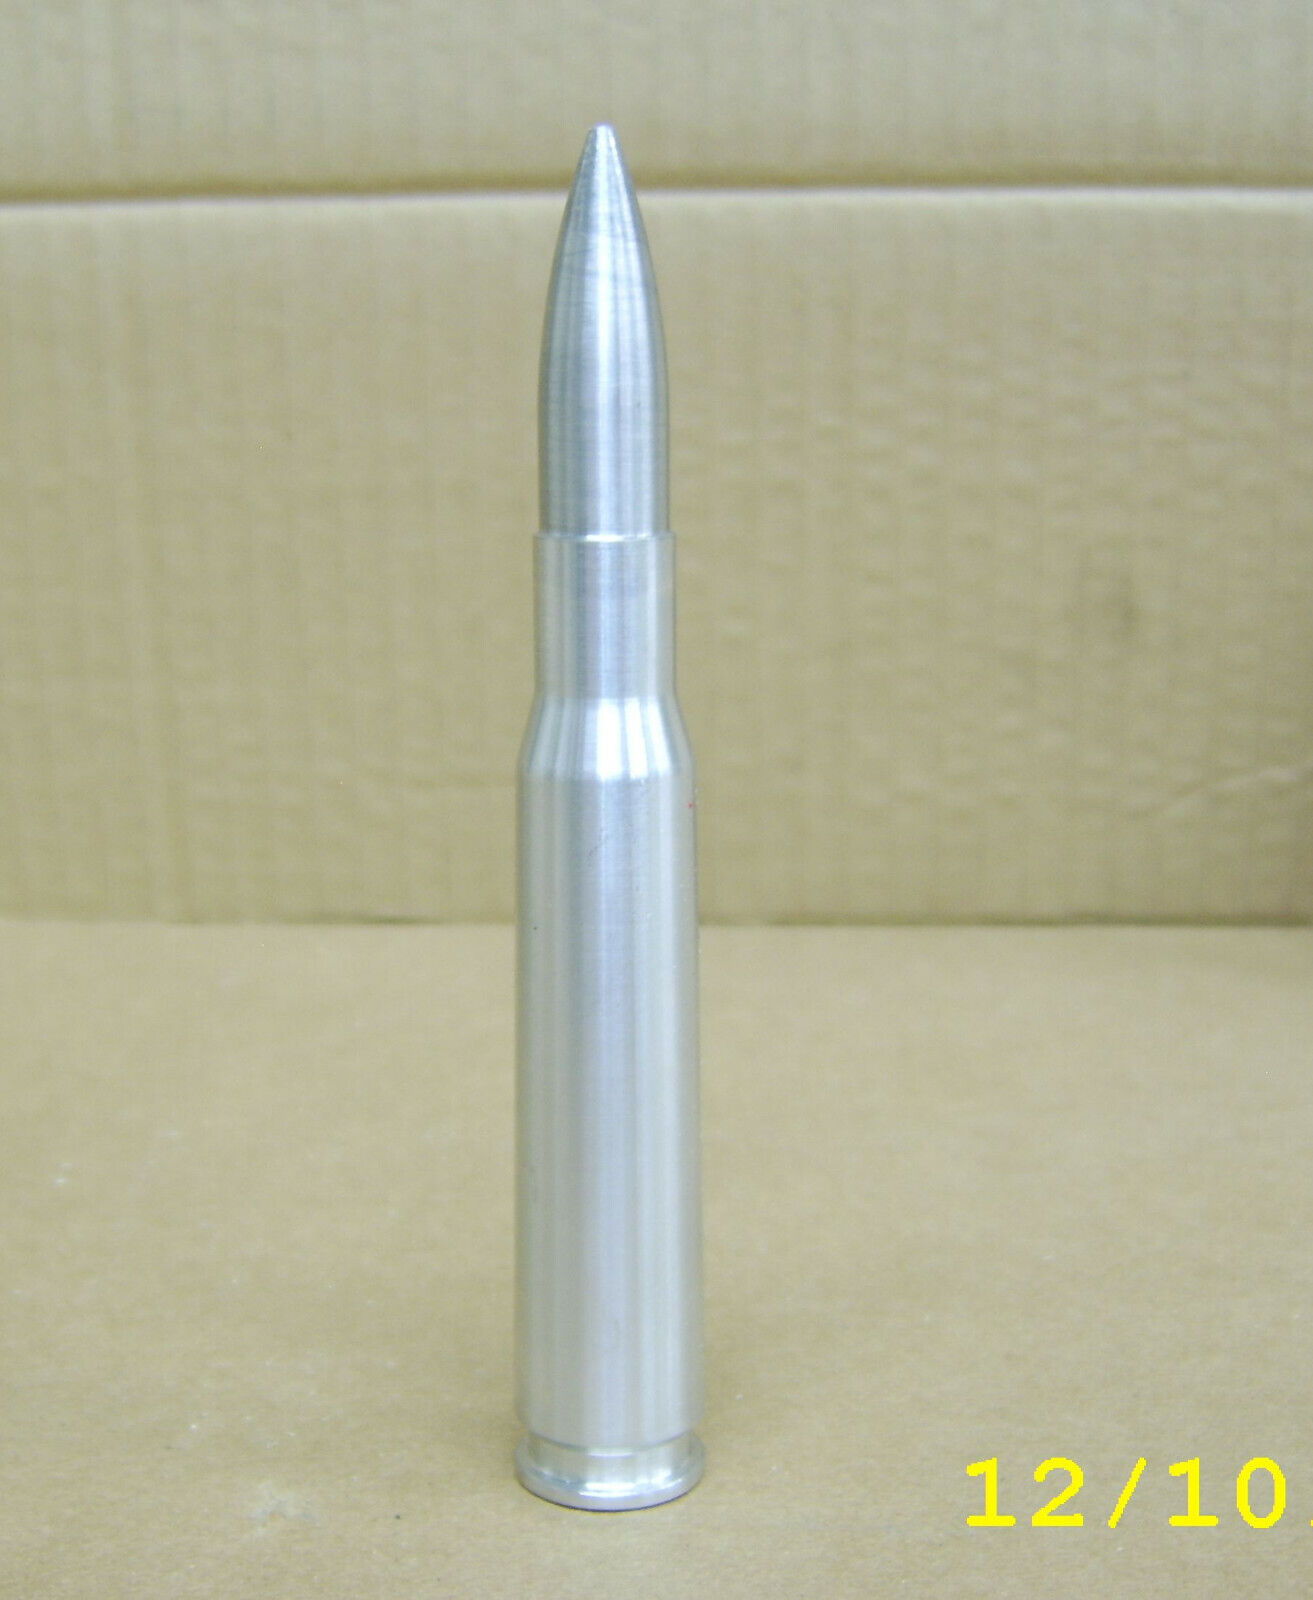 50 BMG cal paper weight, Solid Aluminum, NEW, novelty display item paperweight